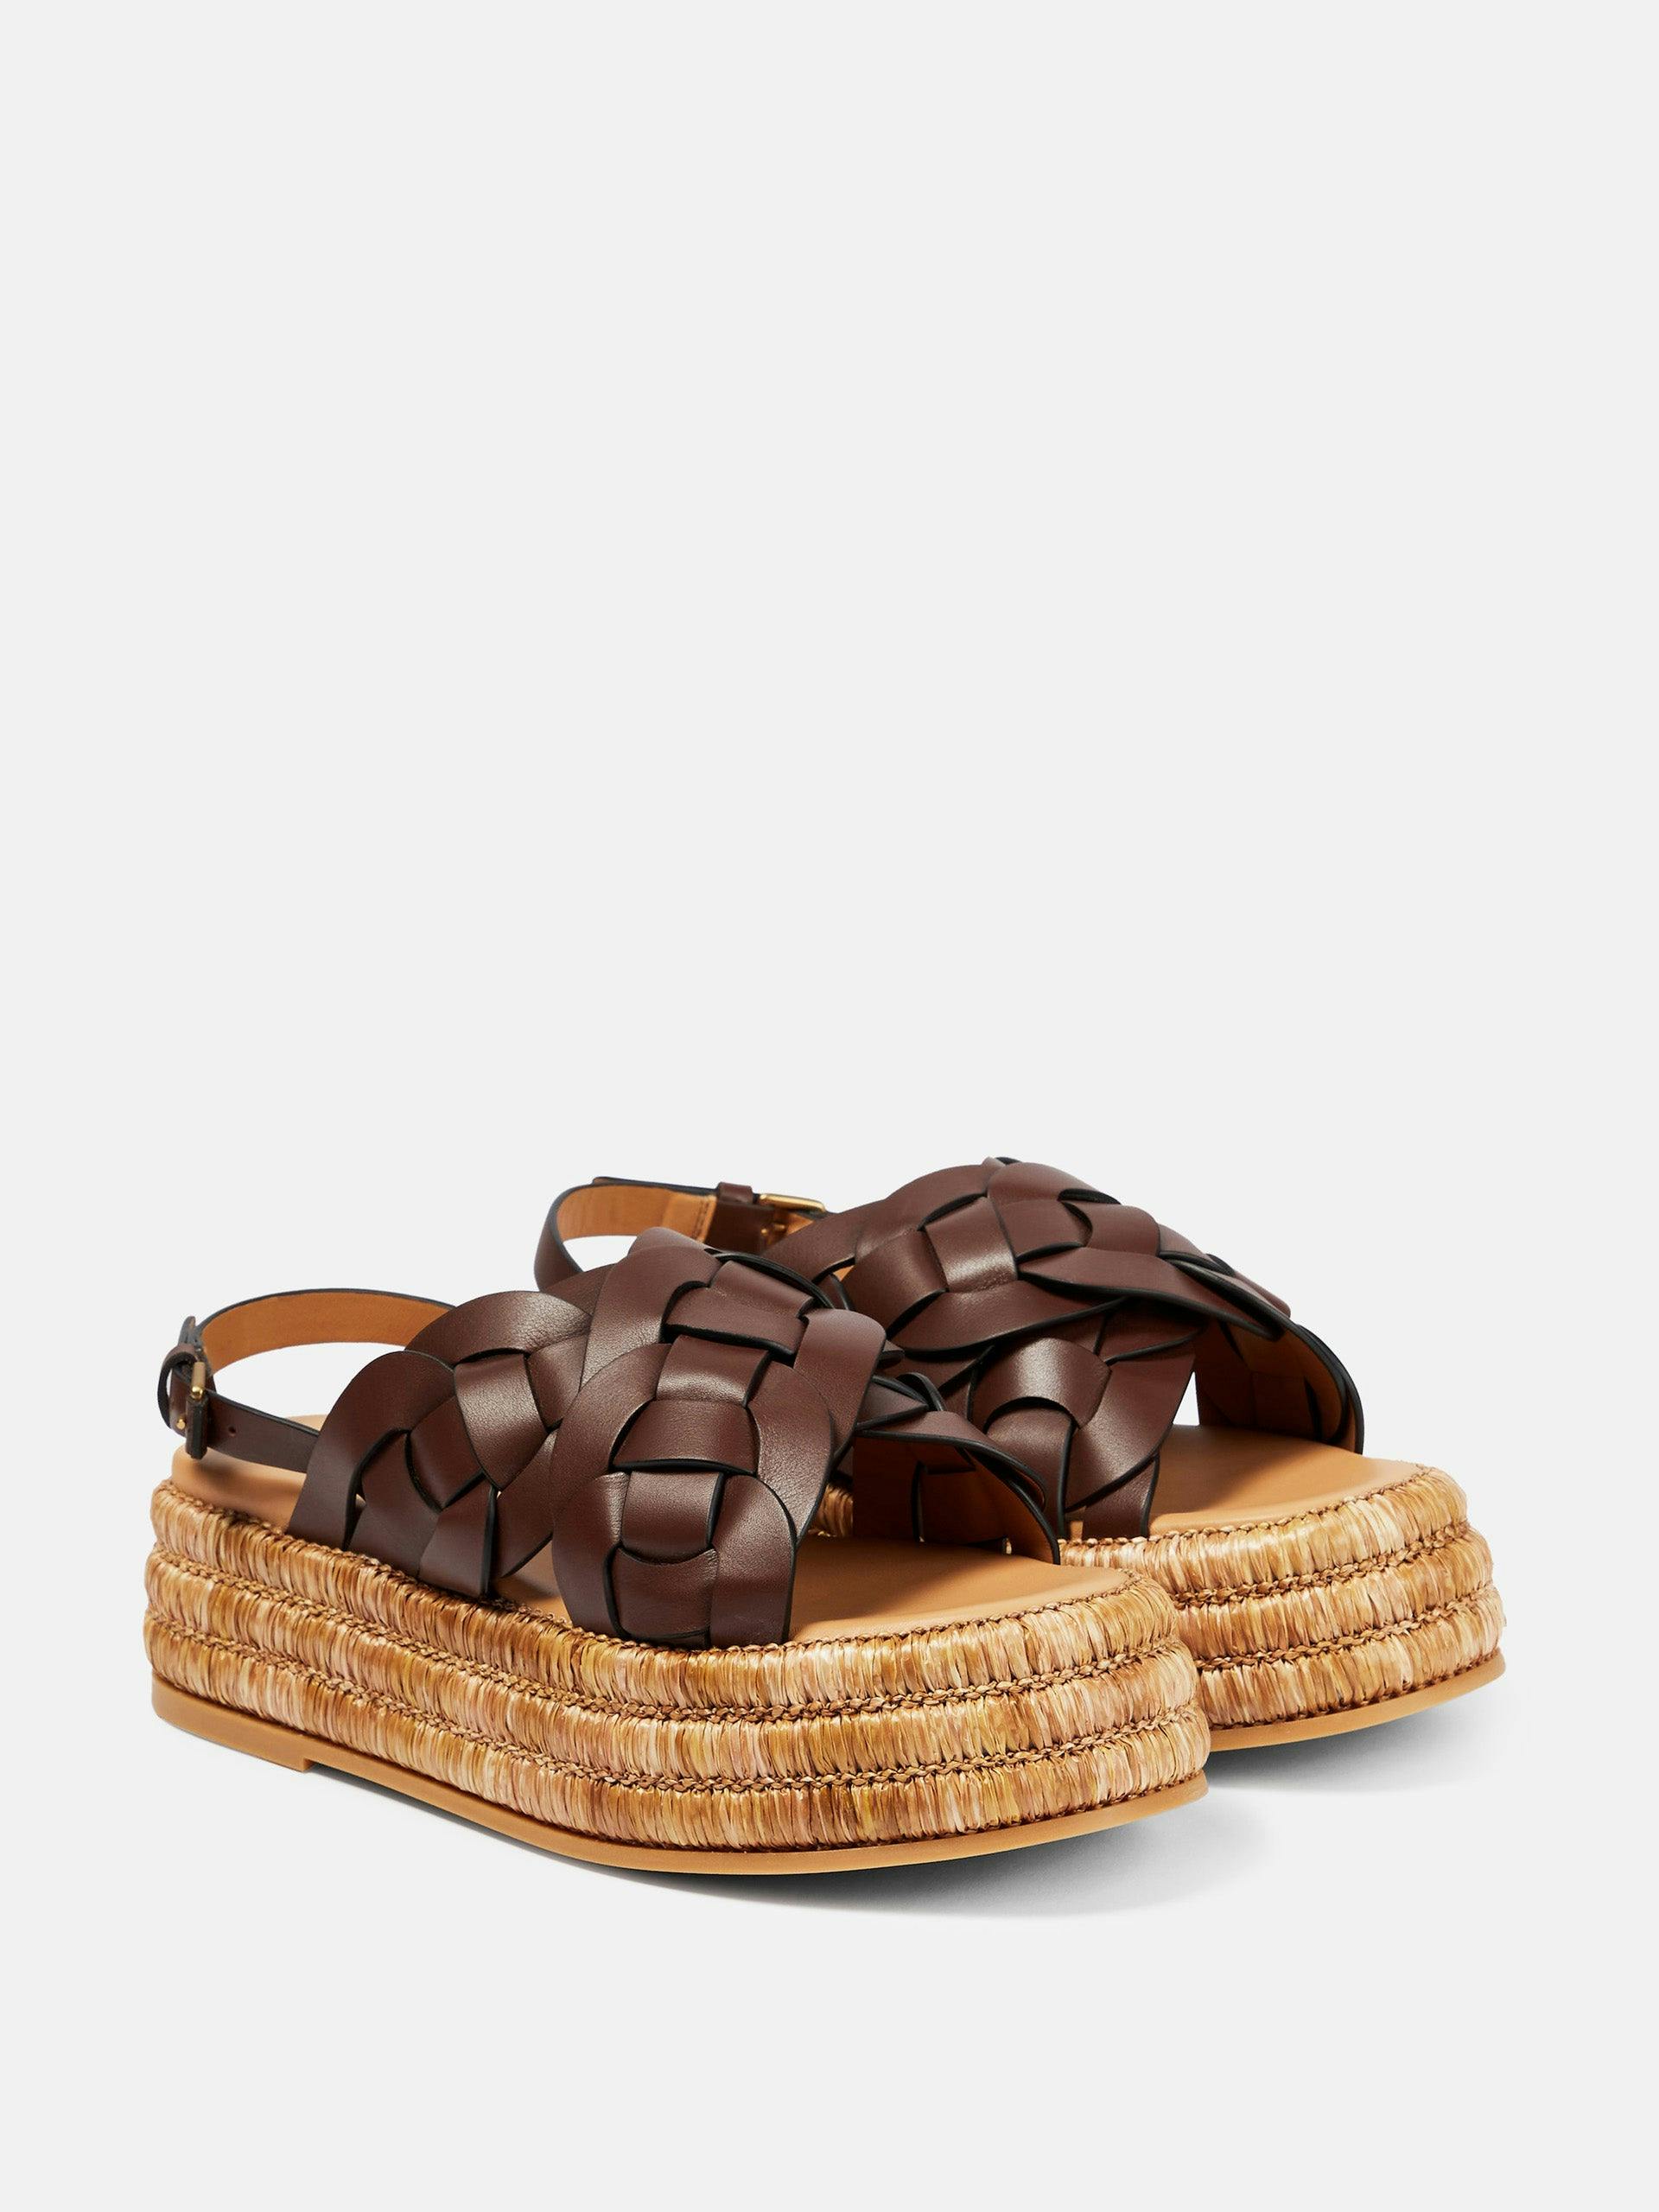 Jute and woven leather platform sandals